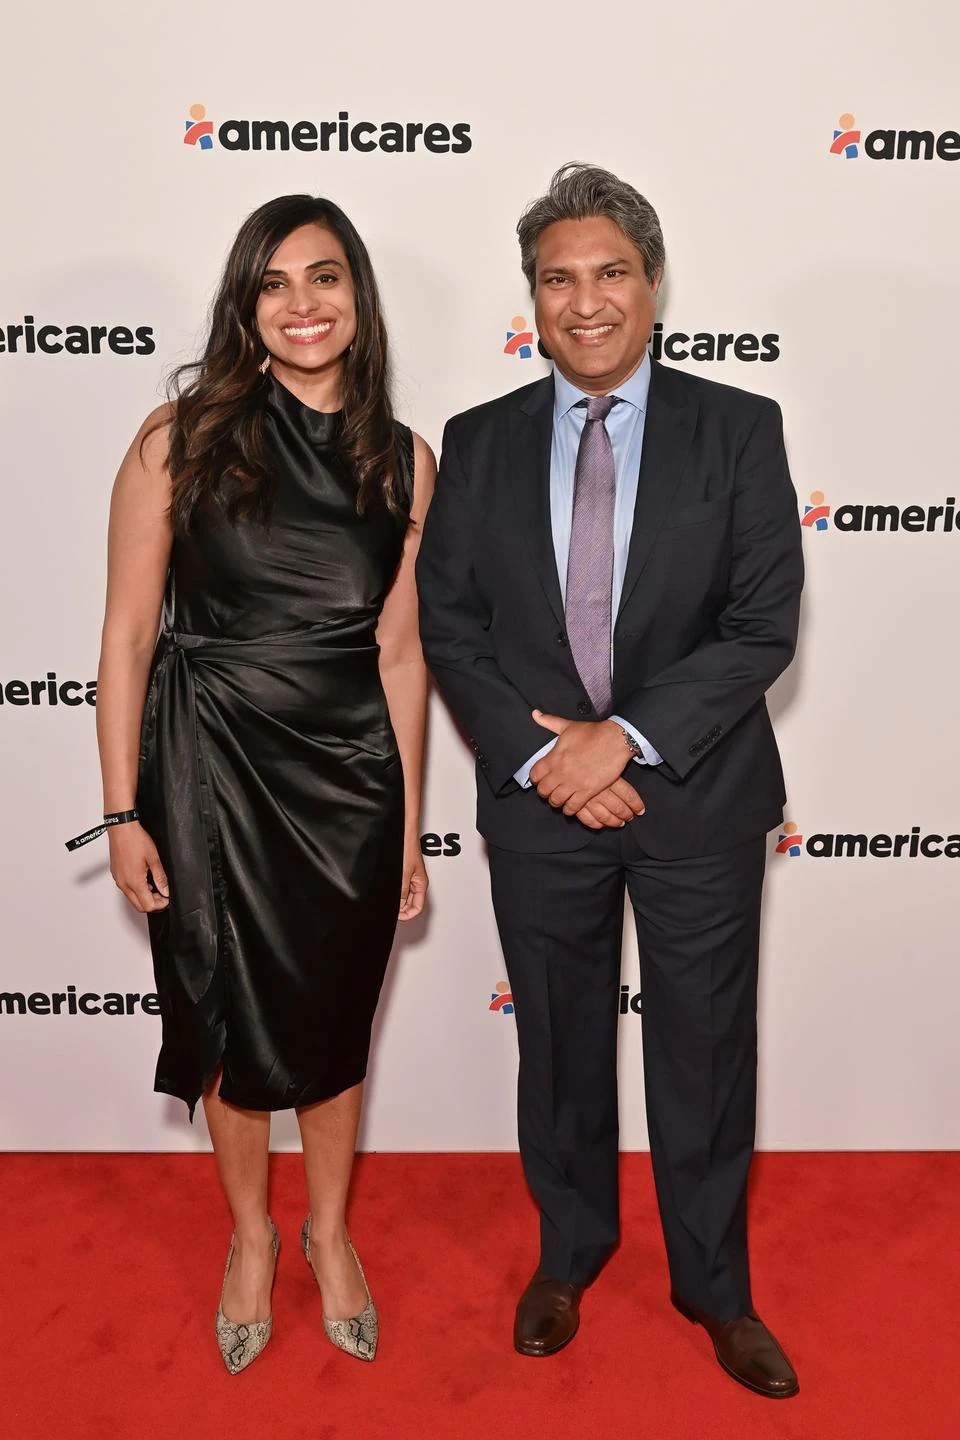 Americares Senior Vice President of Programs and Chief Medical Officer Dr. Julie Varughese and Americares Deputy Senior Vice President of Emergency Programs Provash Budden at the 2024 Americares Airlift Benefit. Photo by Bryan Bedder/Getty Images for Americares.